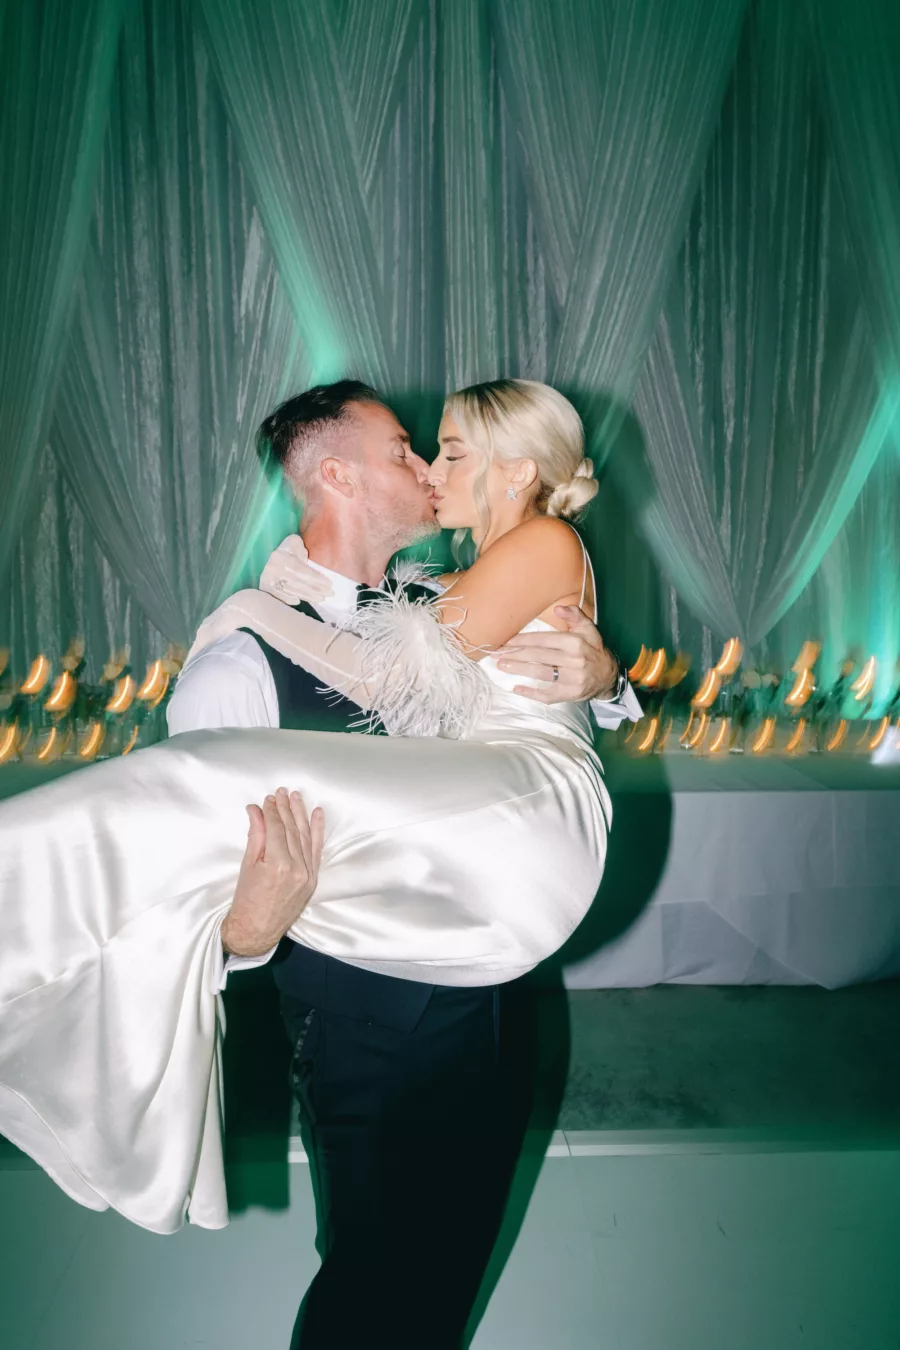 Bride and Groom Last Dance Wedding Portrait | White Satin Reception Dress with Feather Gloves Inspiration | Tampa Bay DJ Grant Hemond and Associates